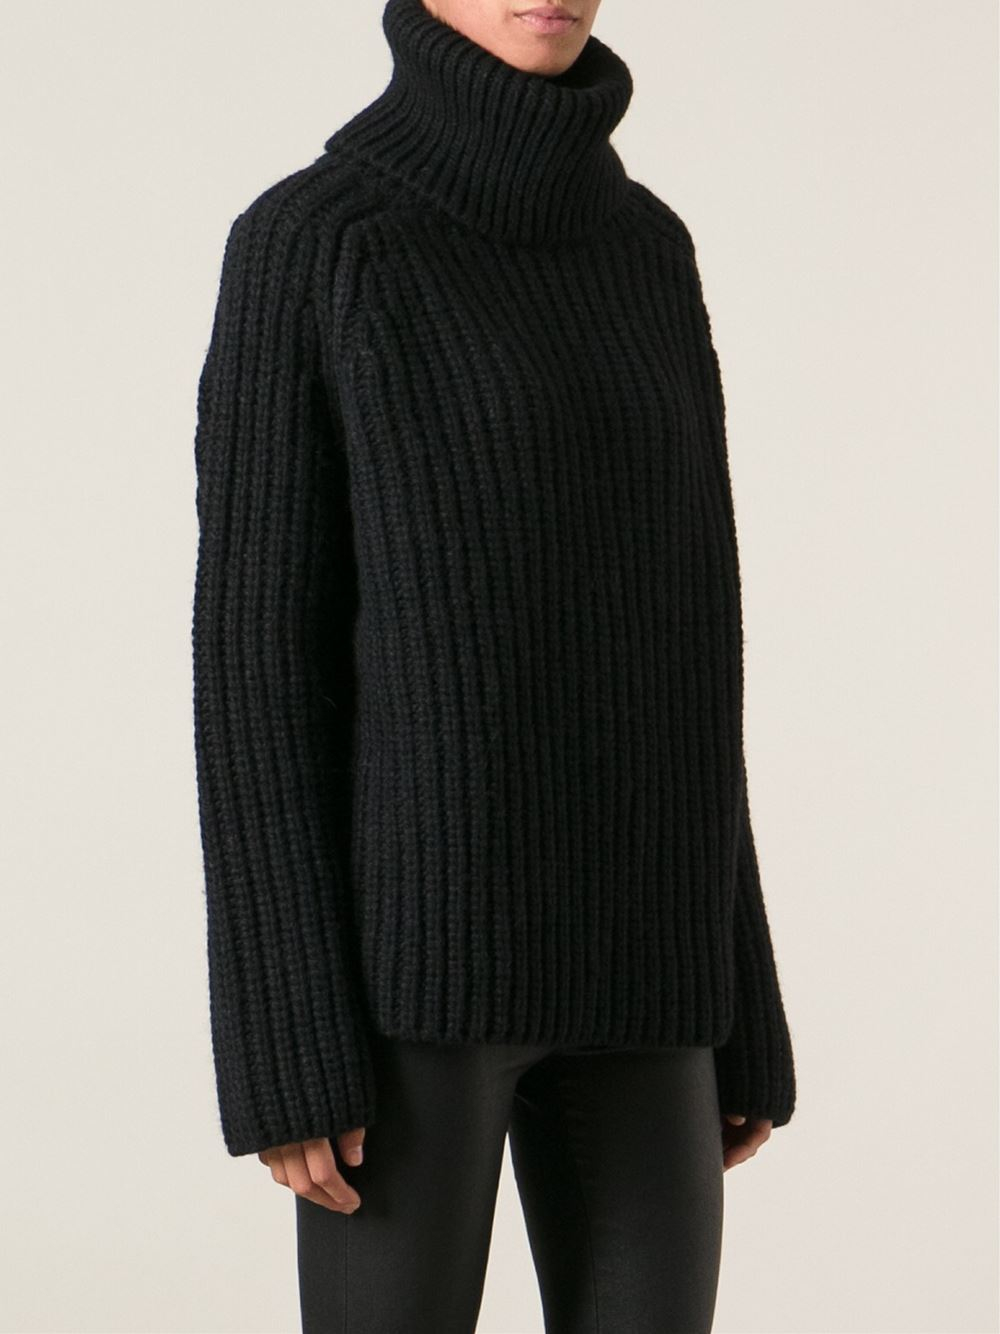 ann-demeulemeester-black-chunky-knit-turtleneck-sweater-product-1-22942983-1-371940494-normal.jpeg